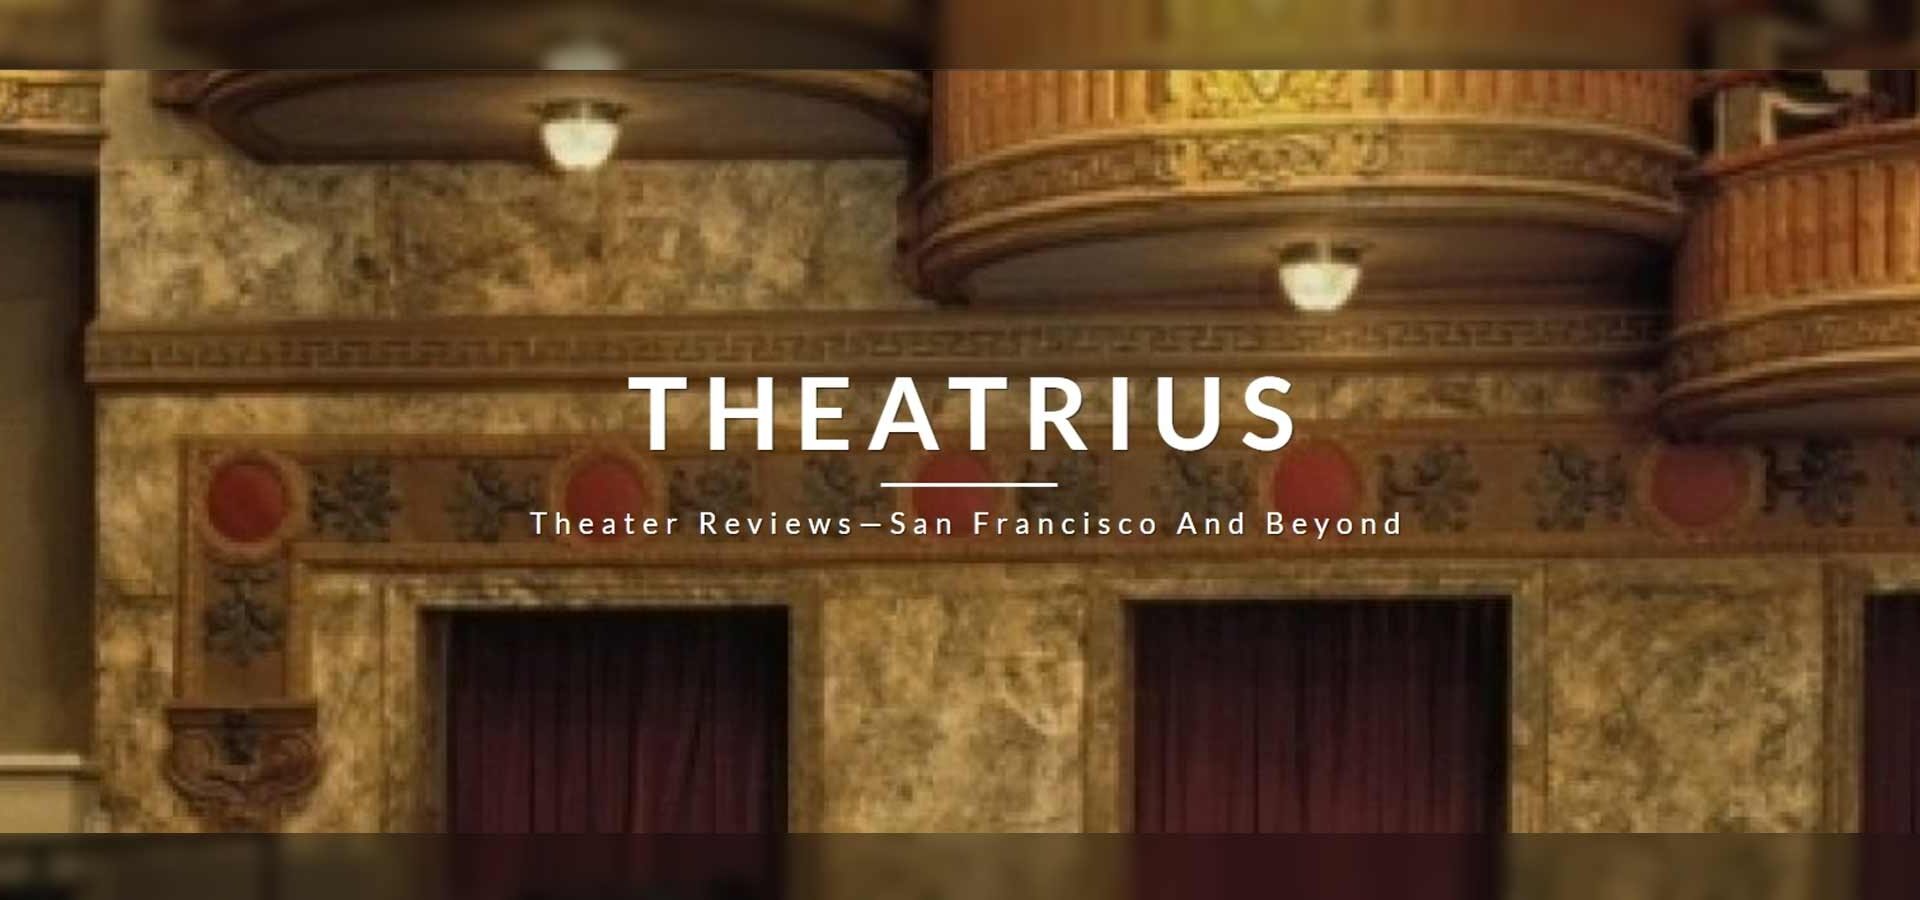 THEATRIUS, Theater Reviews—San Francisco And Beyond. White text over the photo of an early 1900s theater in gold and marble.